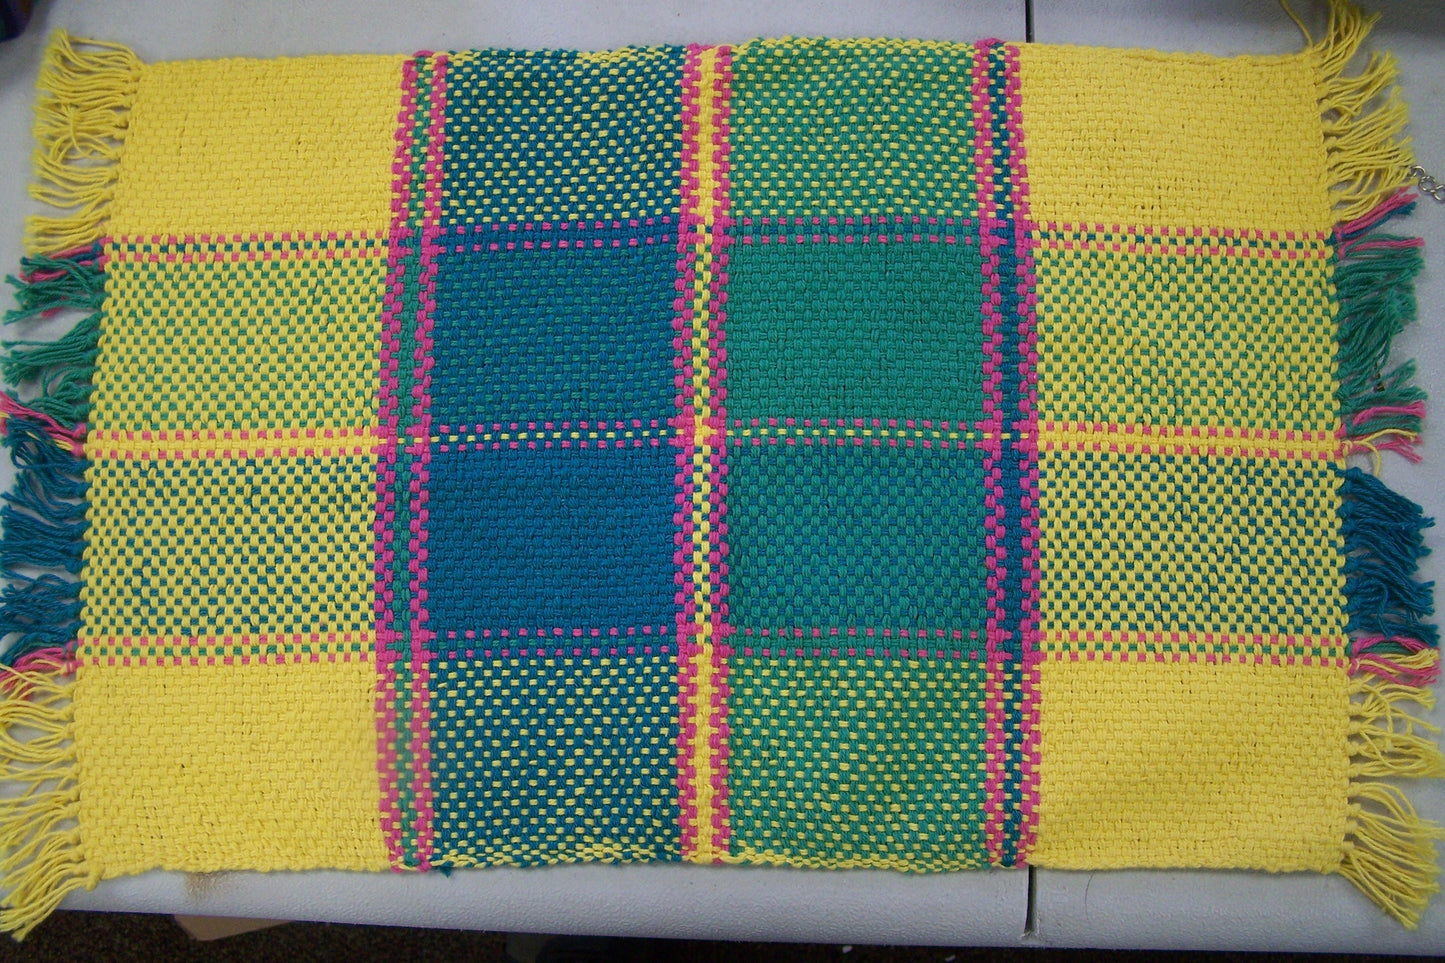 3 Cotton Handwoven Placemats - Yellow/Green